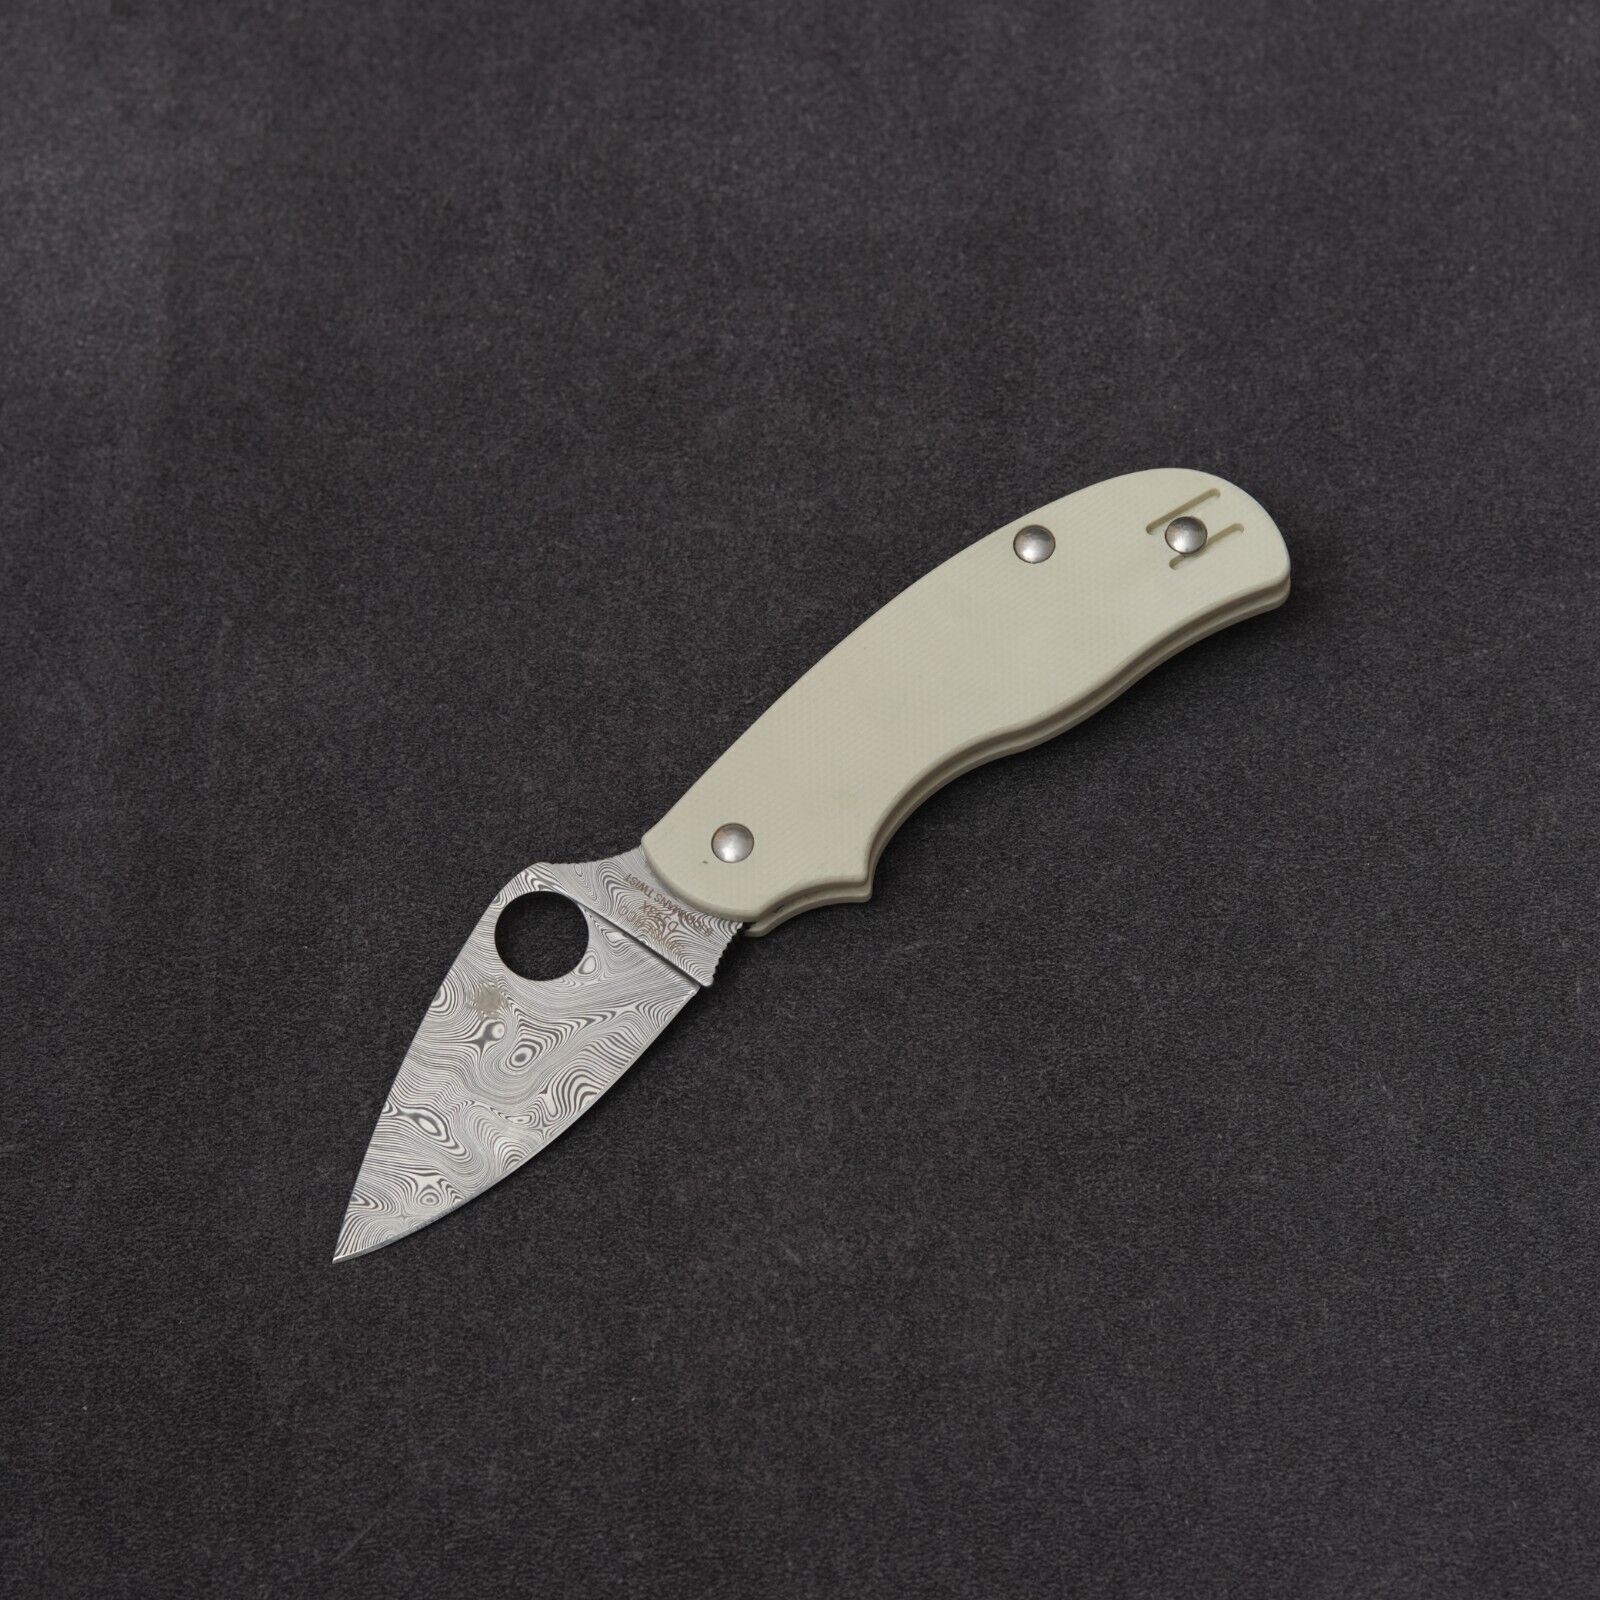 Spyderco Urban Slipjoint Factory Second - White G10 / Damascus / Made in Italy